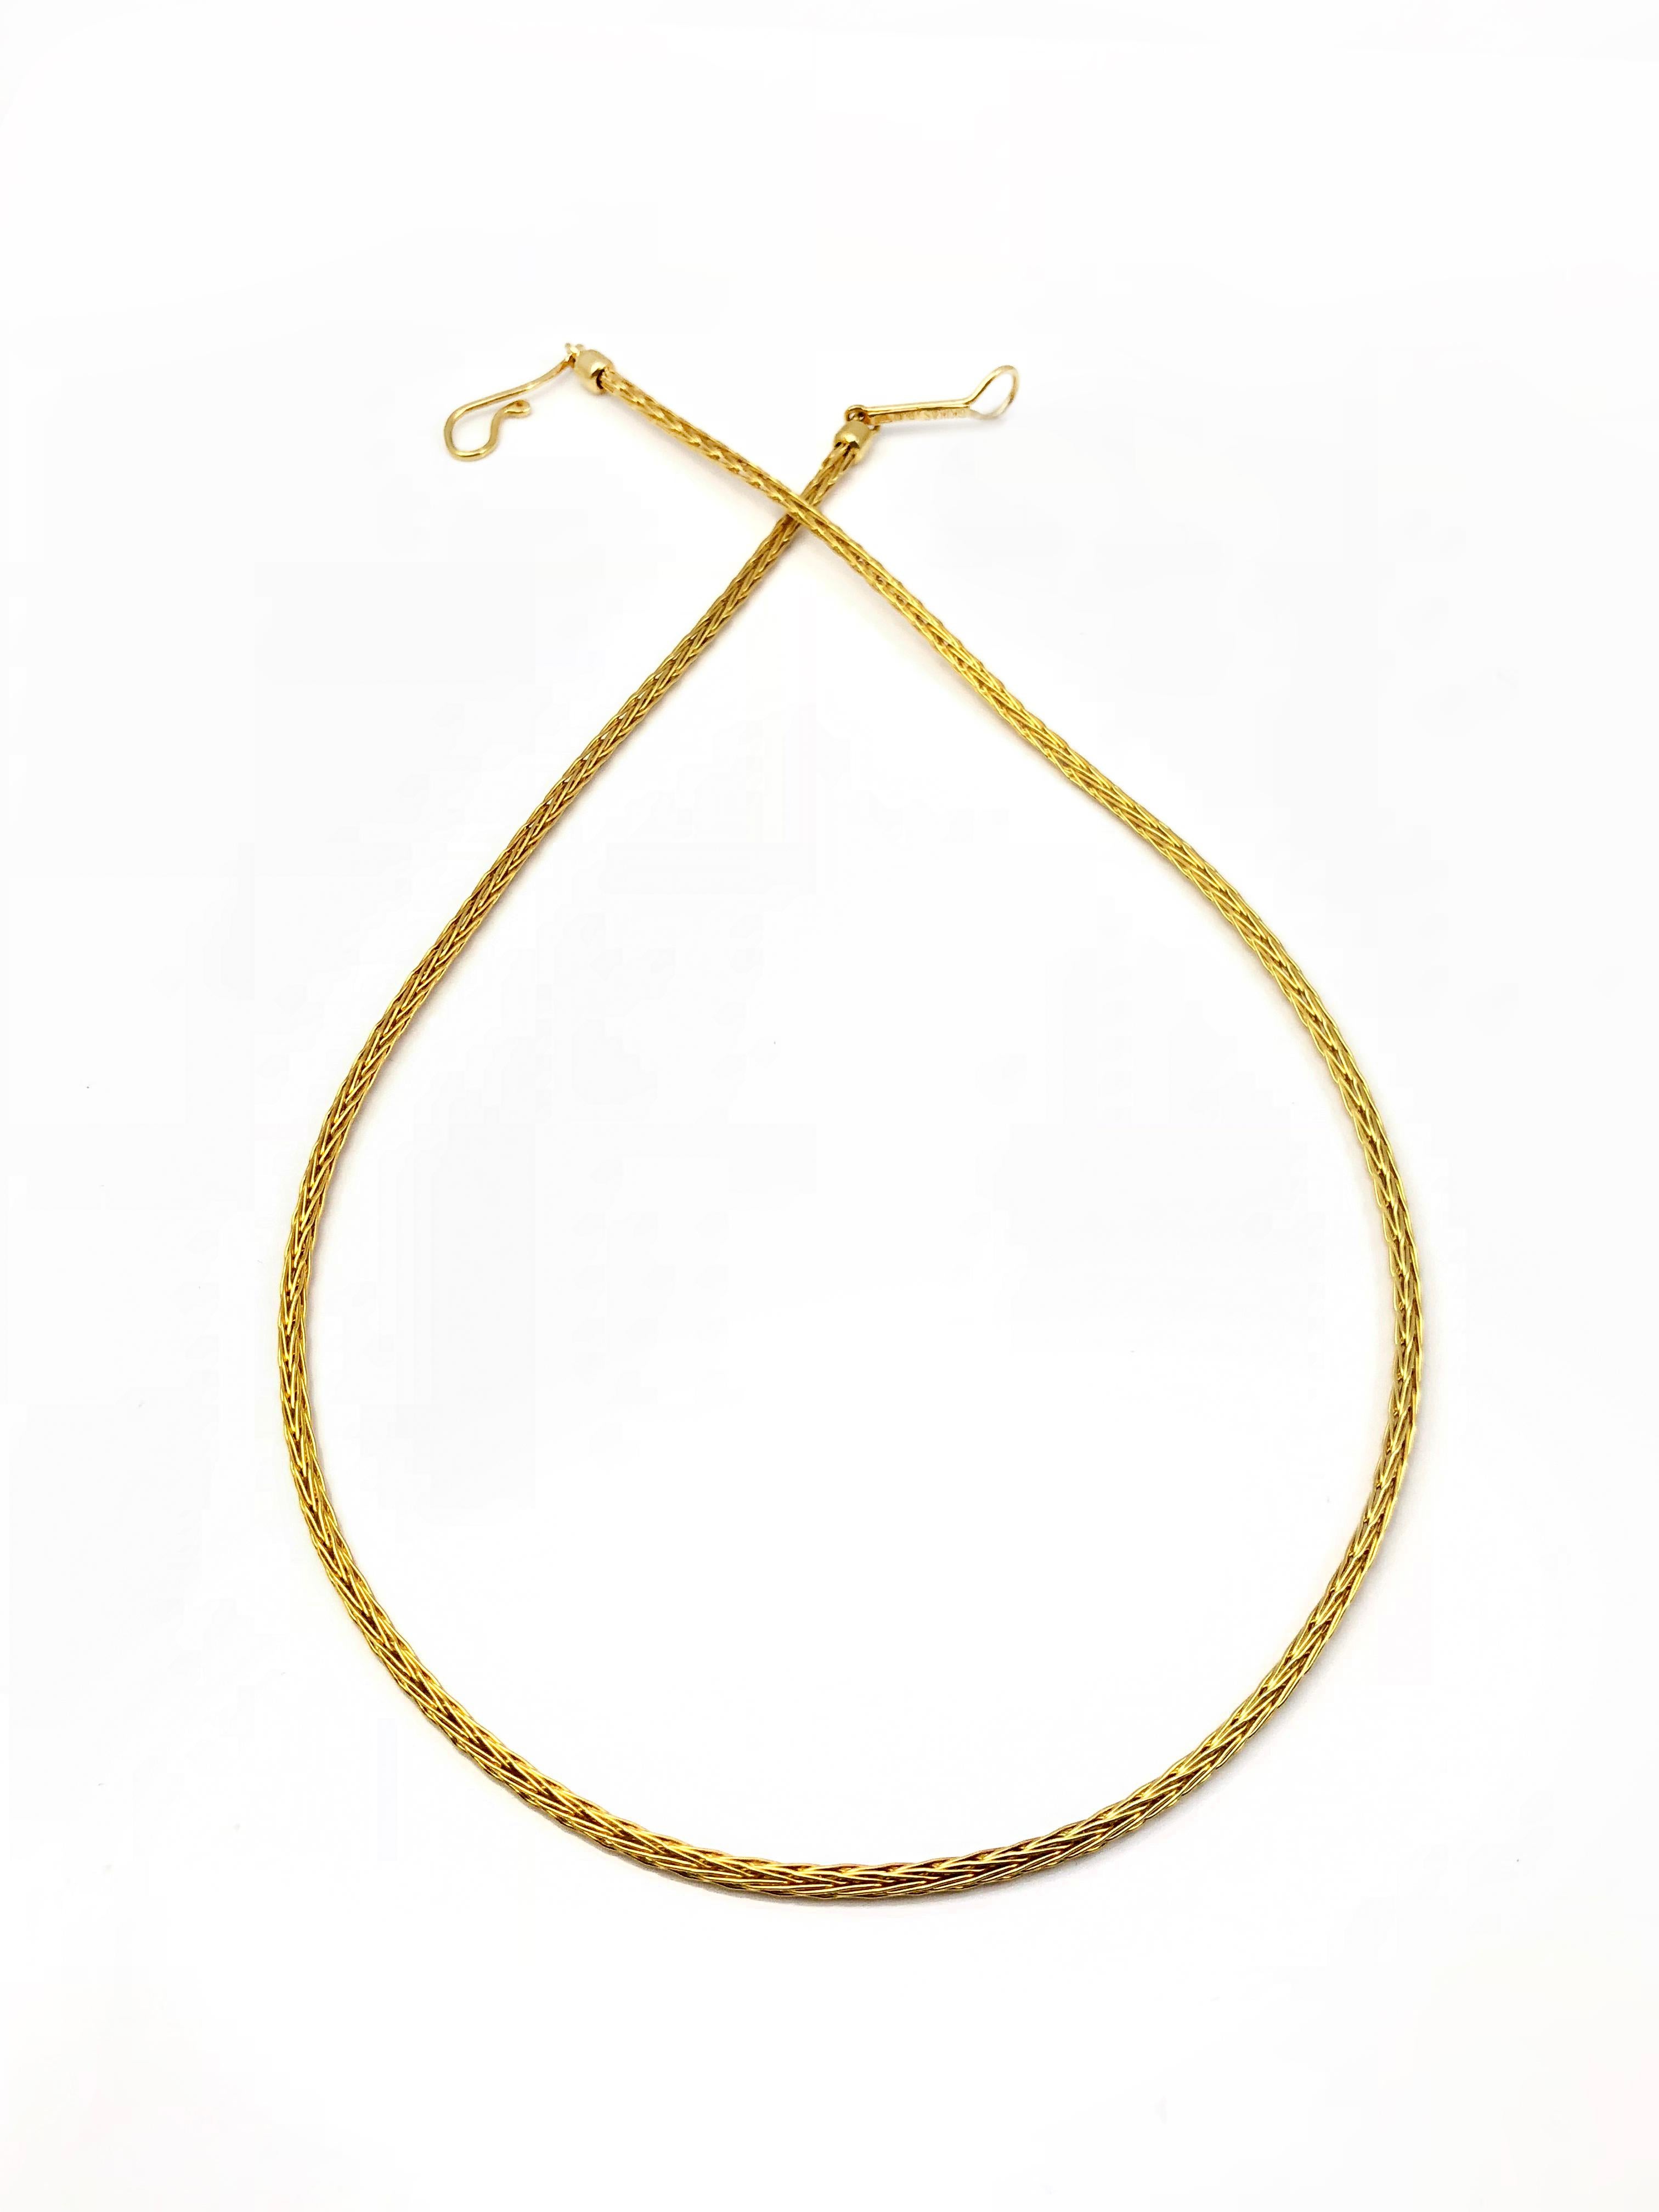 S. Georgios hand-knitted Rope Necklace is made from solid 18 Karat Yellow Gold Threads. With this chain necklace, you can wear all your slides or pendants and have a unique necklace, very different from anything around you. It can be also warren